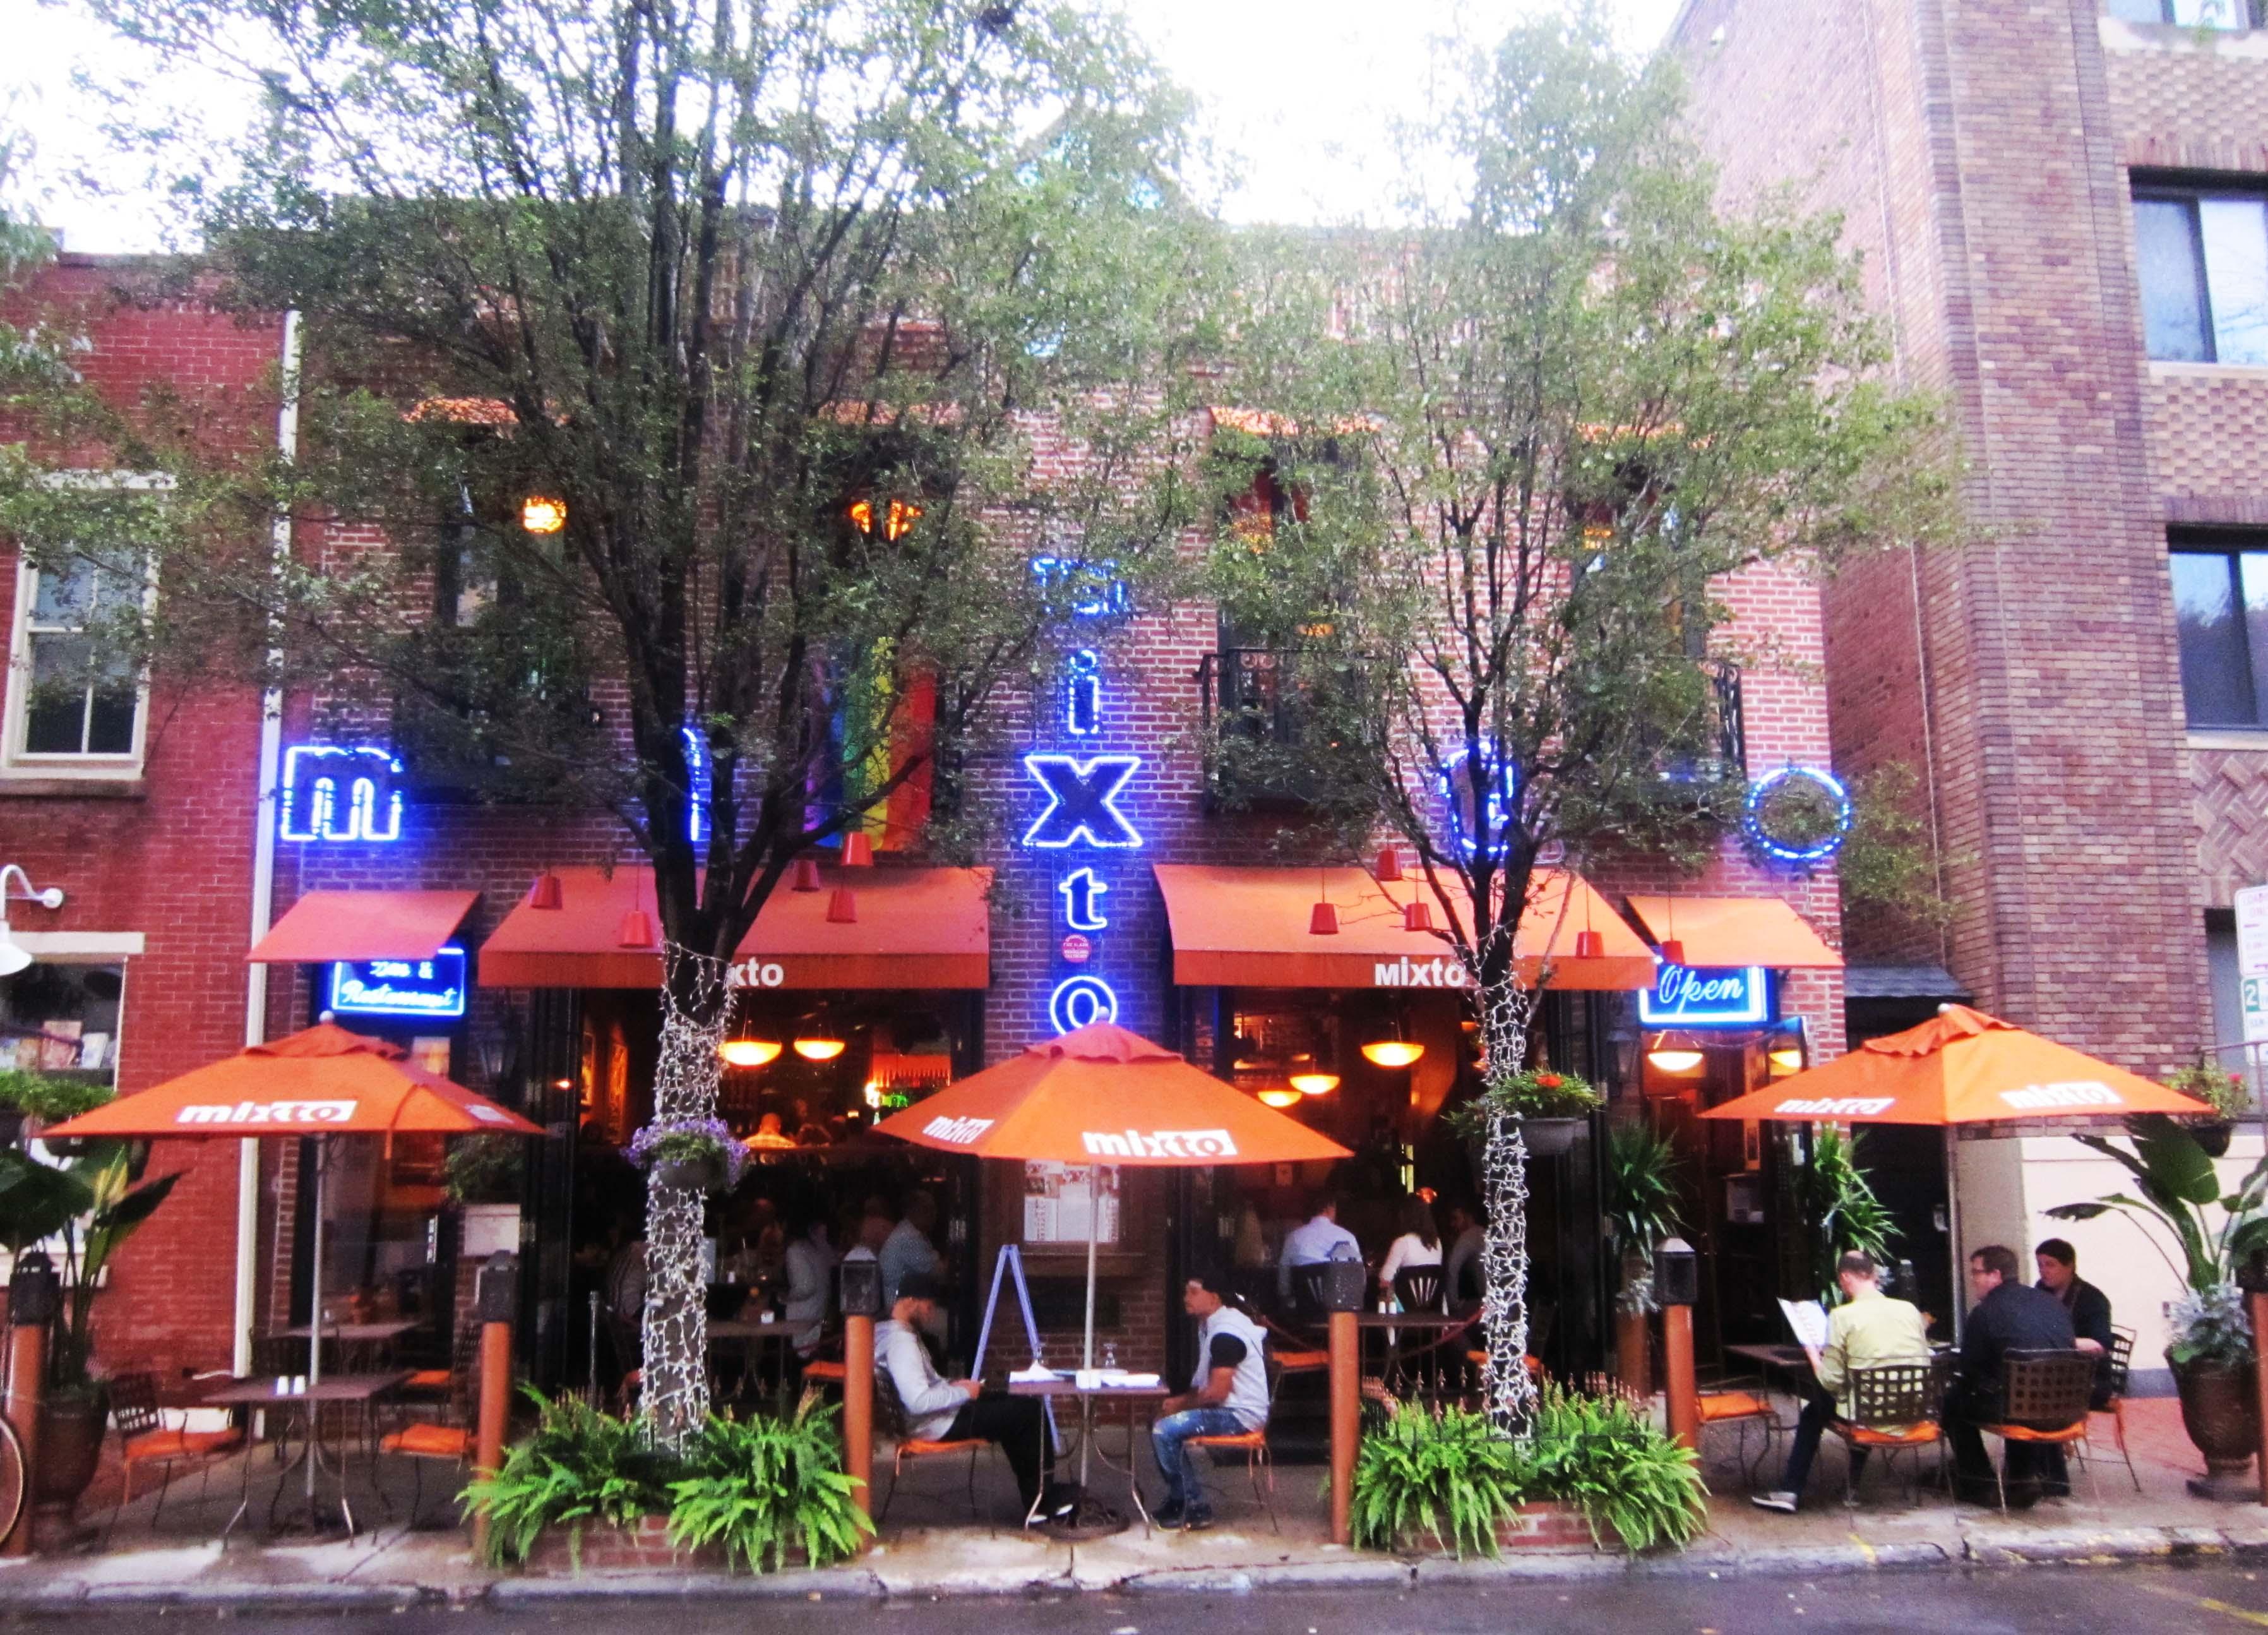 Cover image of this place Mixto Restaurant